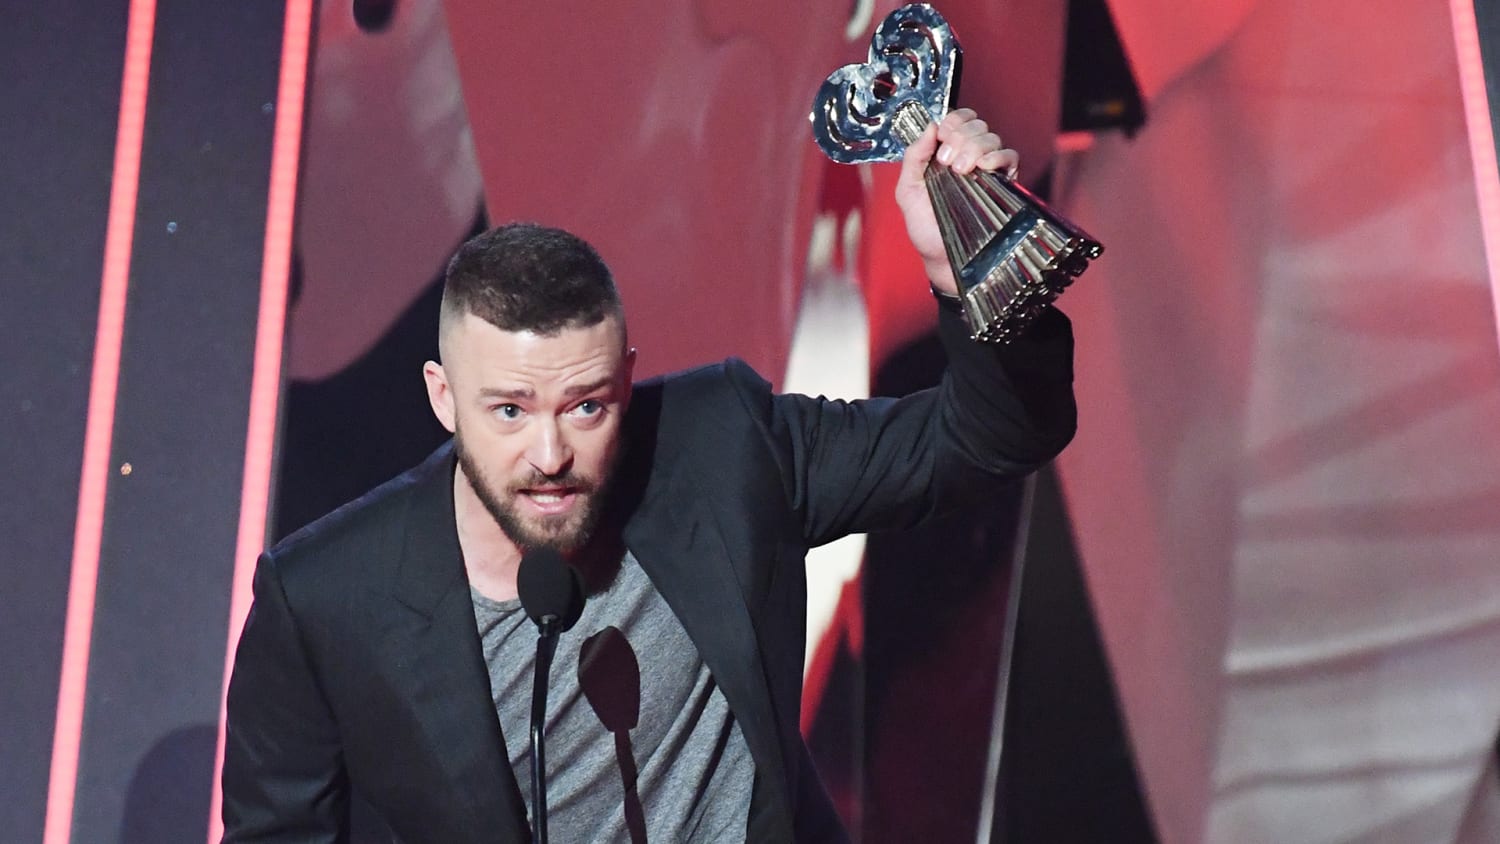 Justin Timberlake's iHeart Radio Awards appearance sparks fan concerns